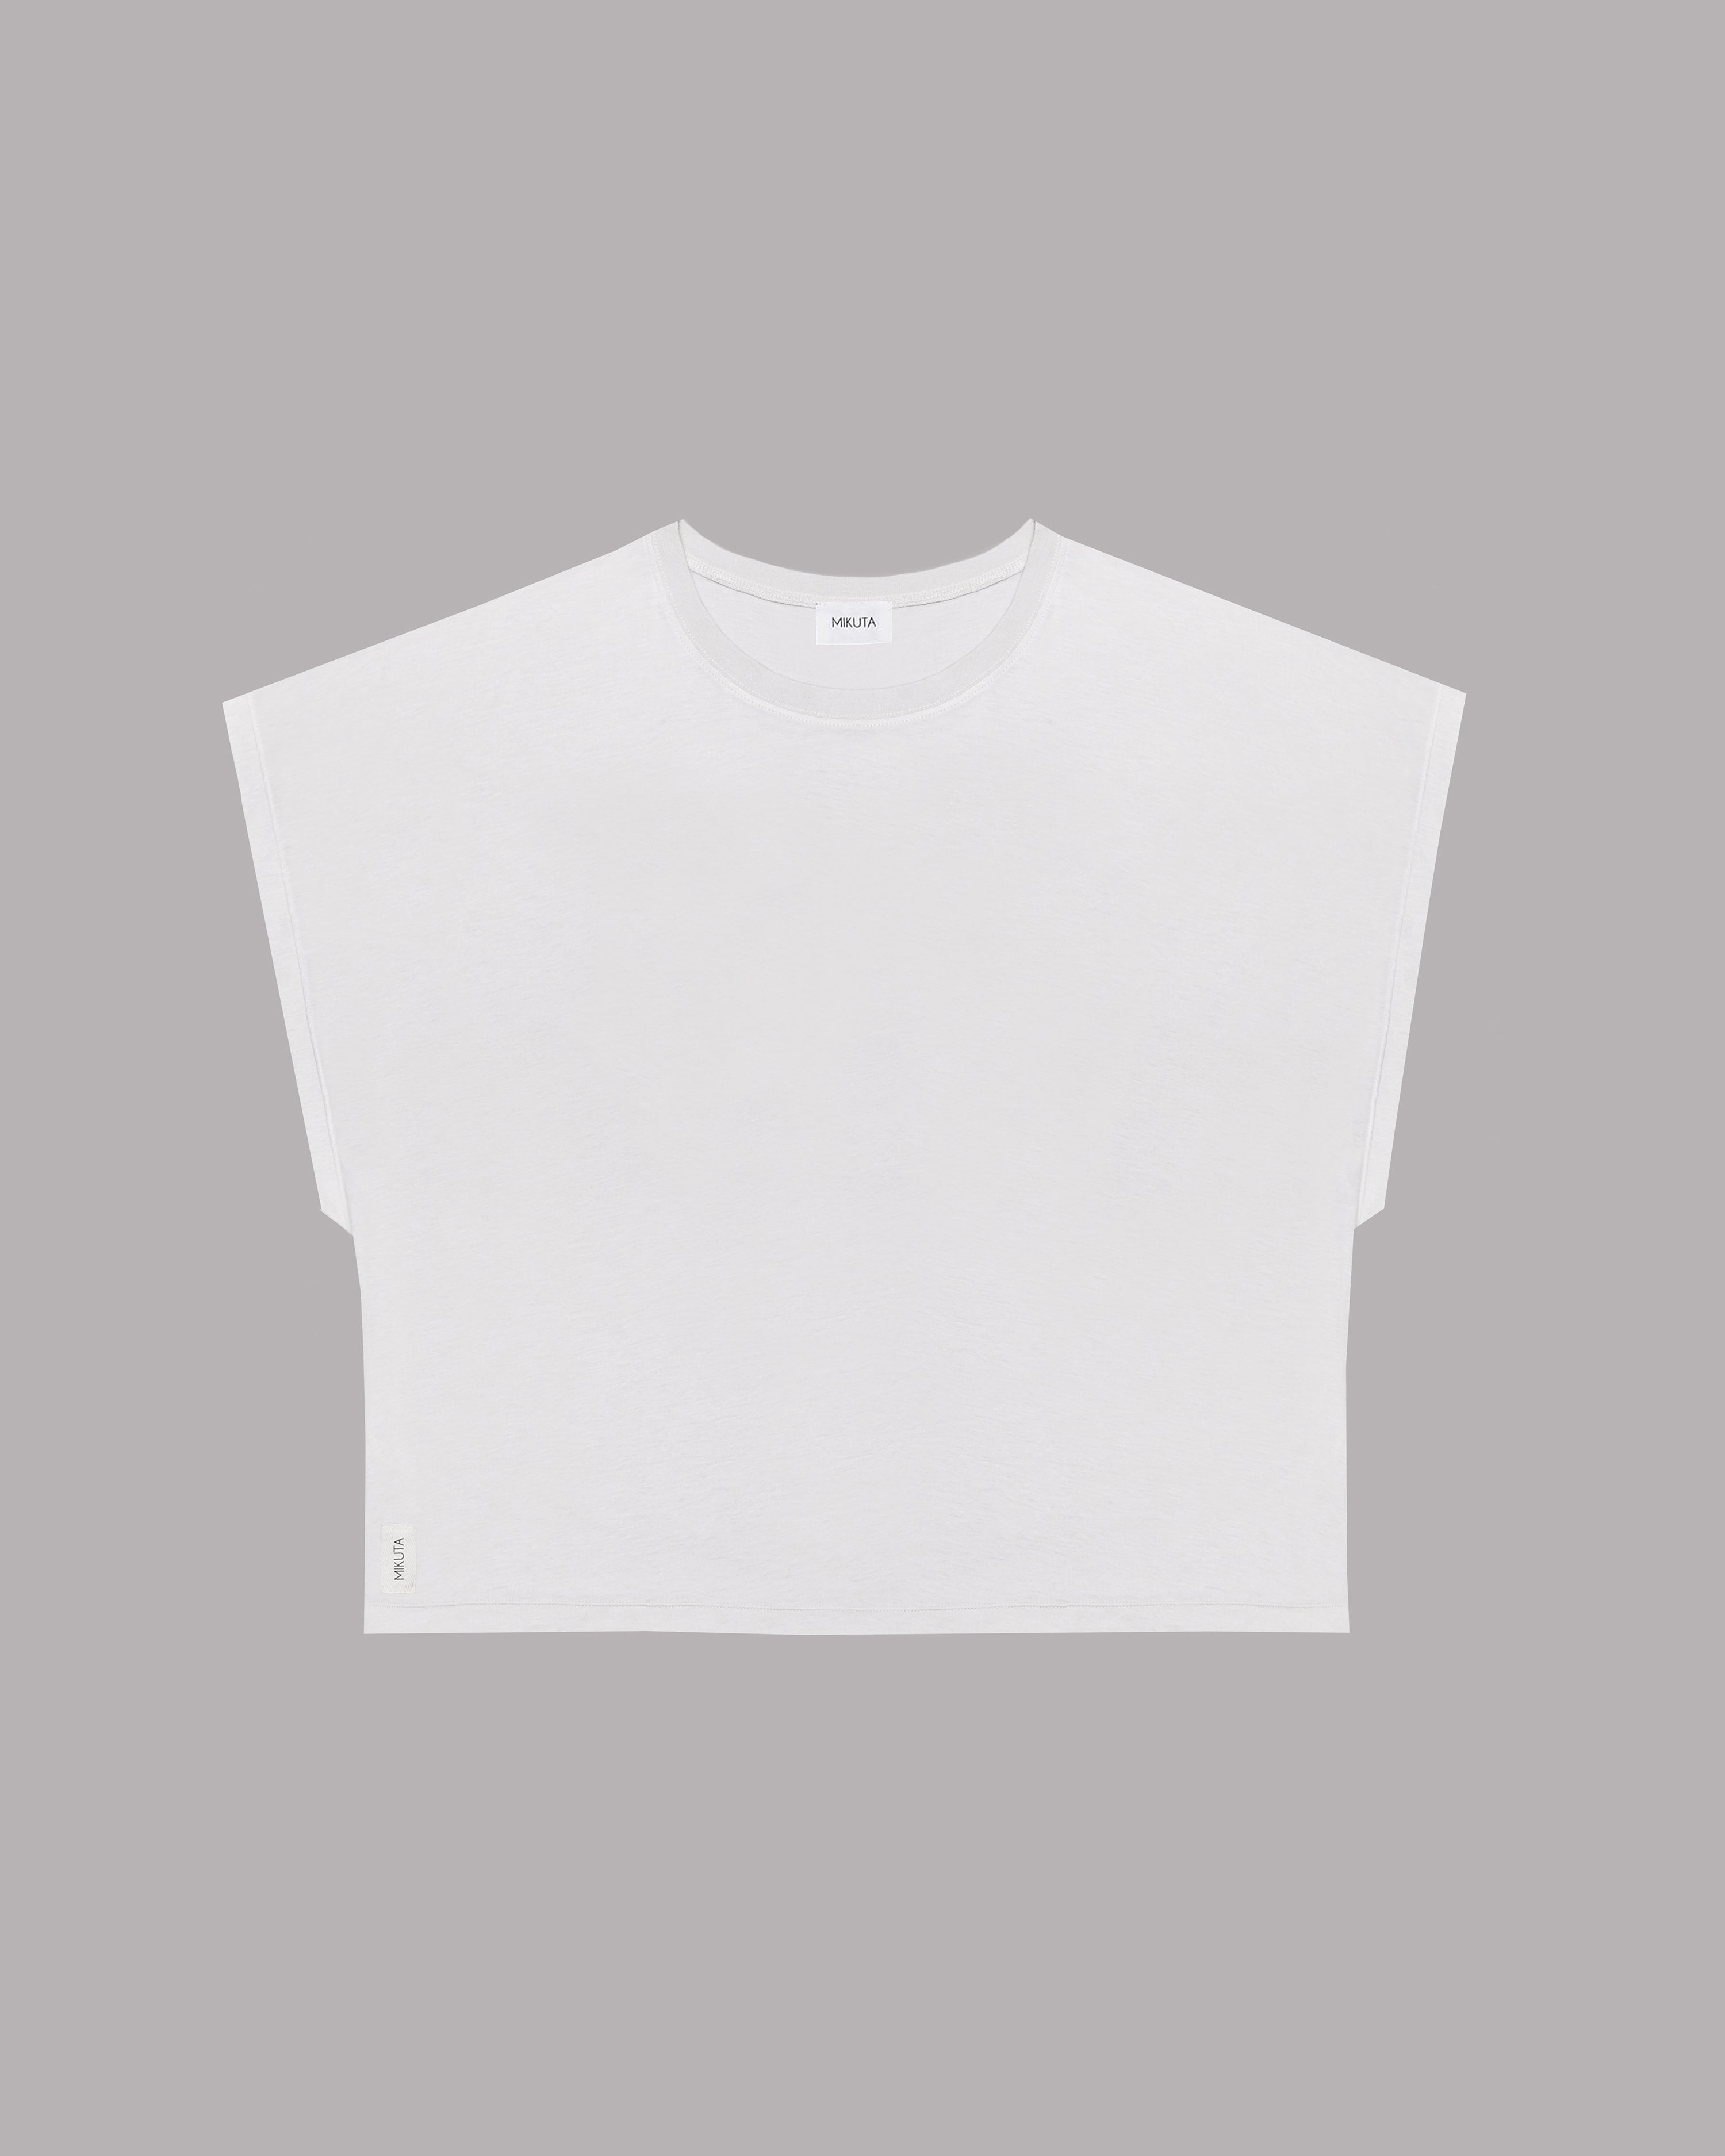 The White Batwing T-Shirt